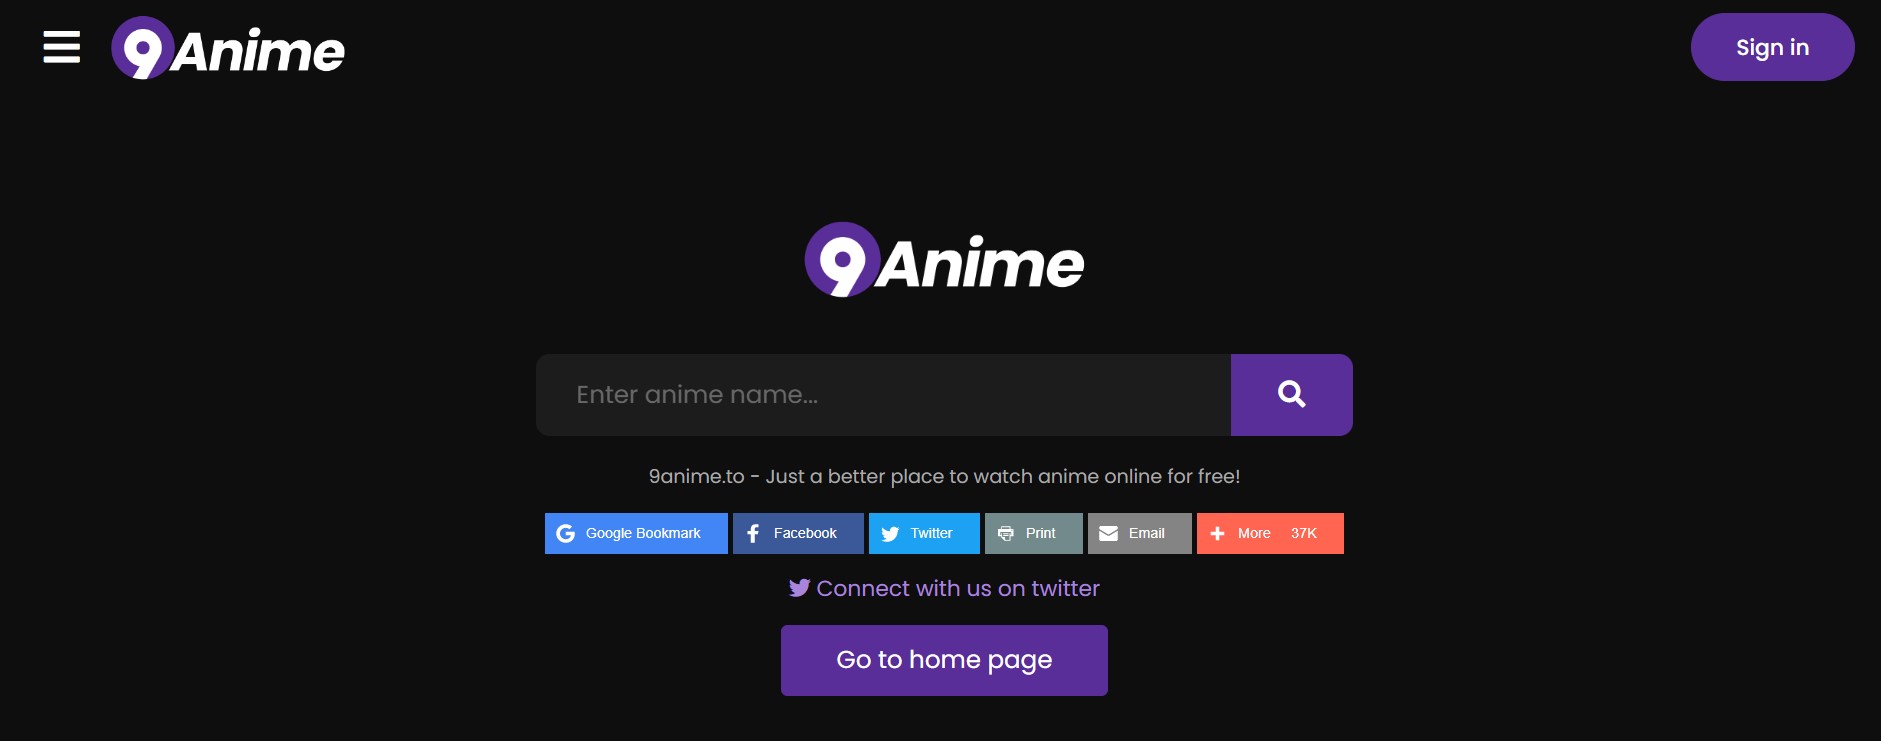 9 Free Anime Streaming Sites to Watch Anime Online Legally | Tech Baked